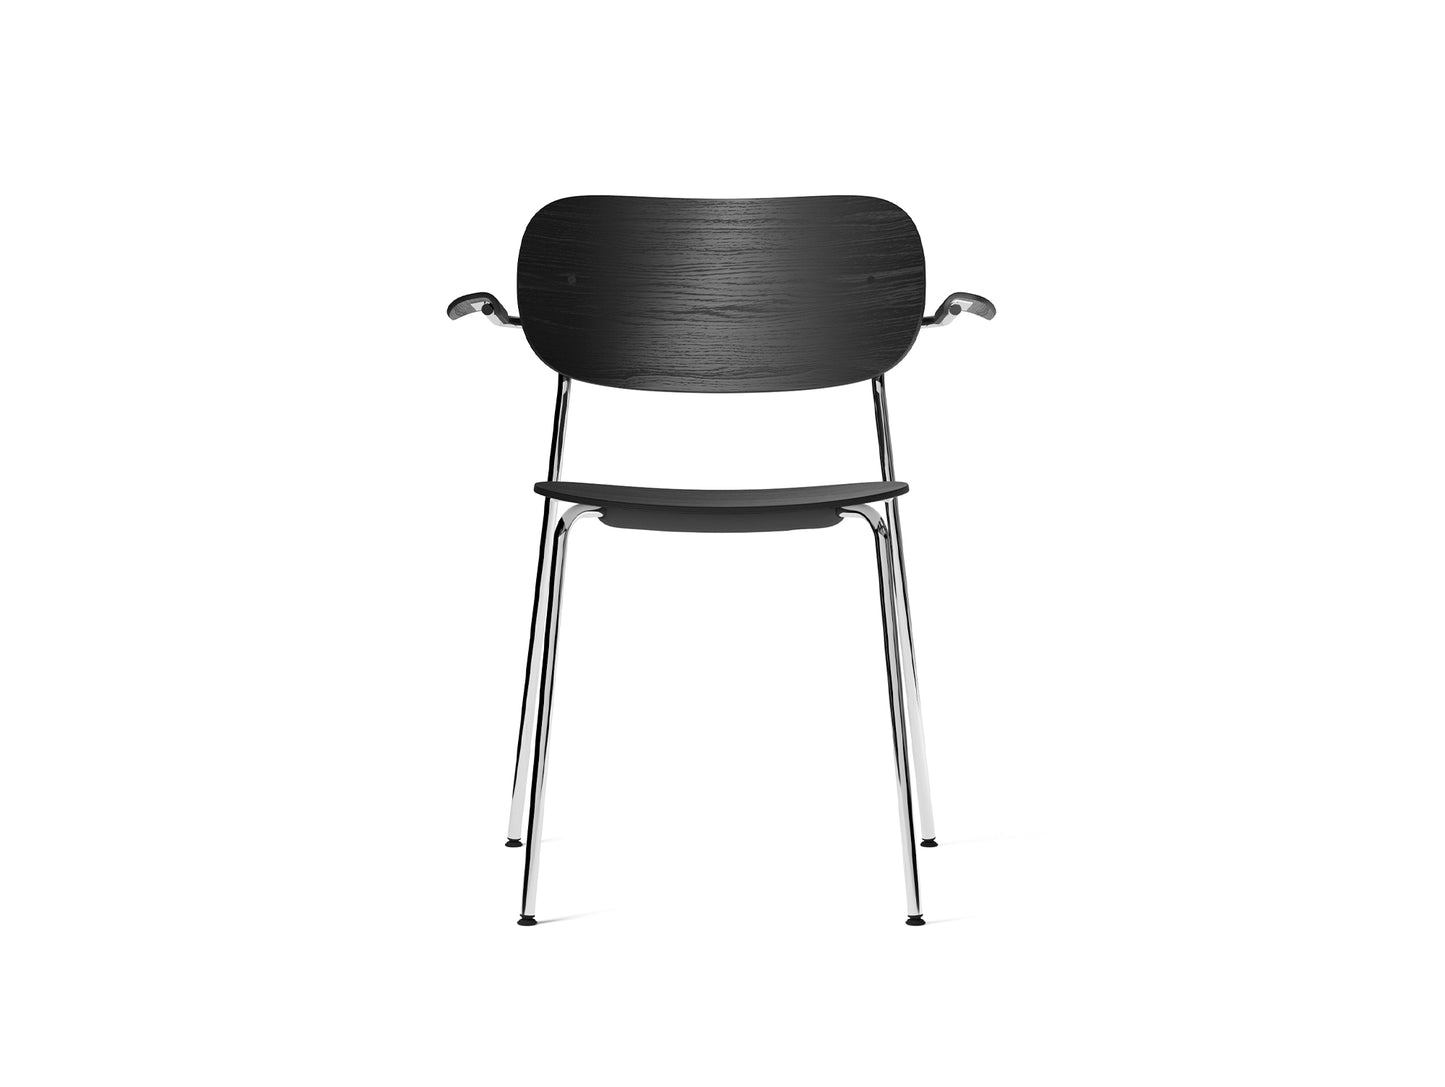 Co Dining Chair by Menu - With Armrest / Chromed Steel / Black Oak